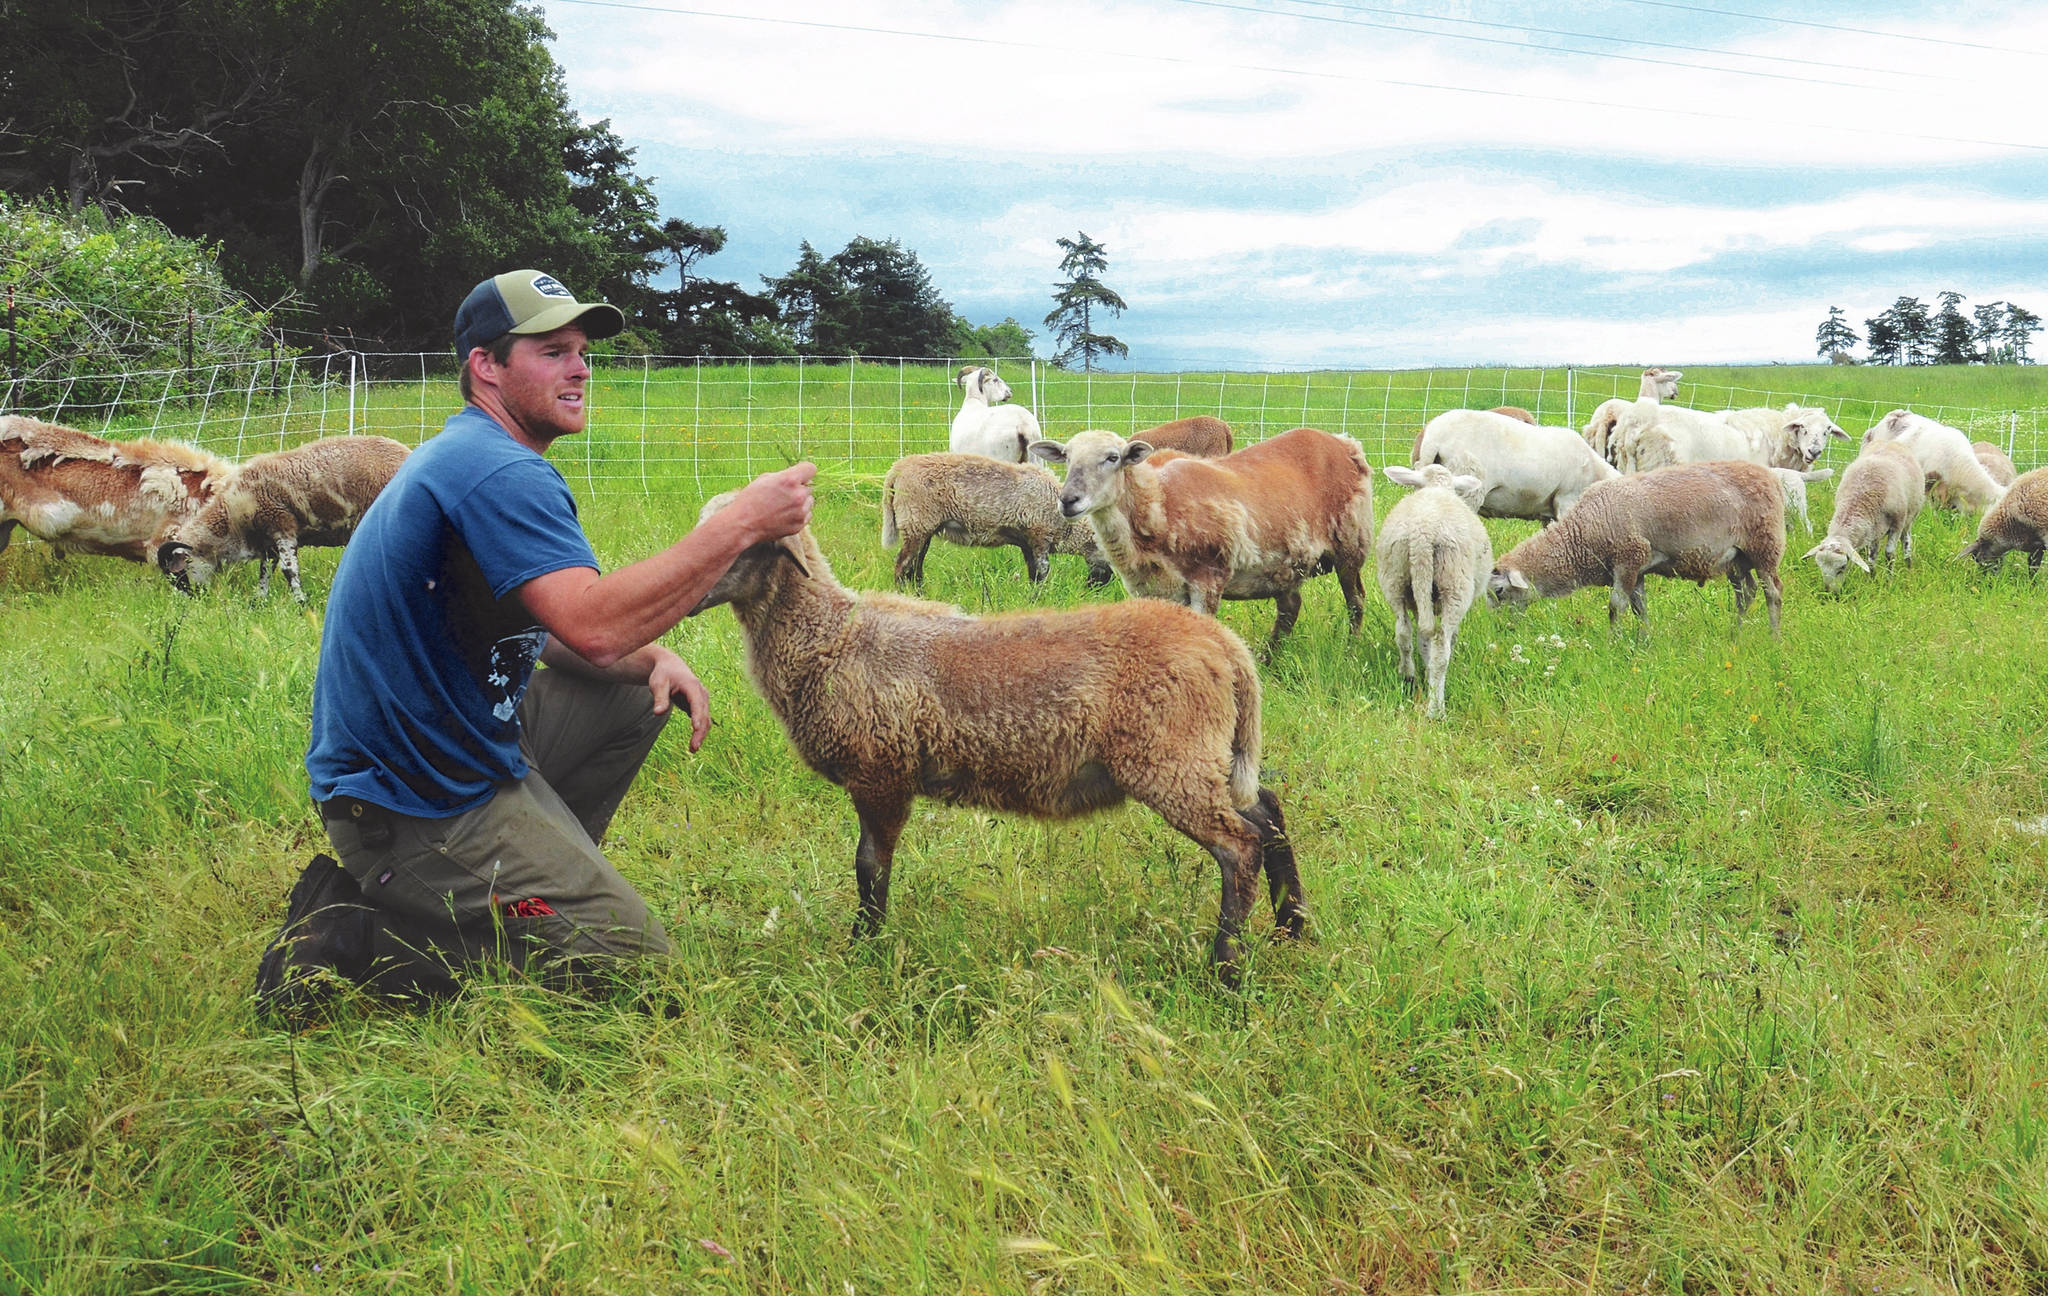 Cory Fakkema has brought the family farm near Oak Harbor into the modern age, using more ecologically sound practices that are considered better for the land and livestock. Photo by Ron Newberry